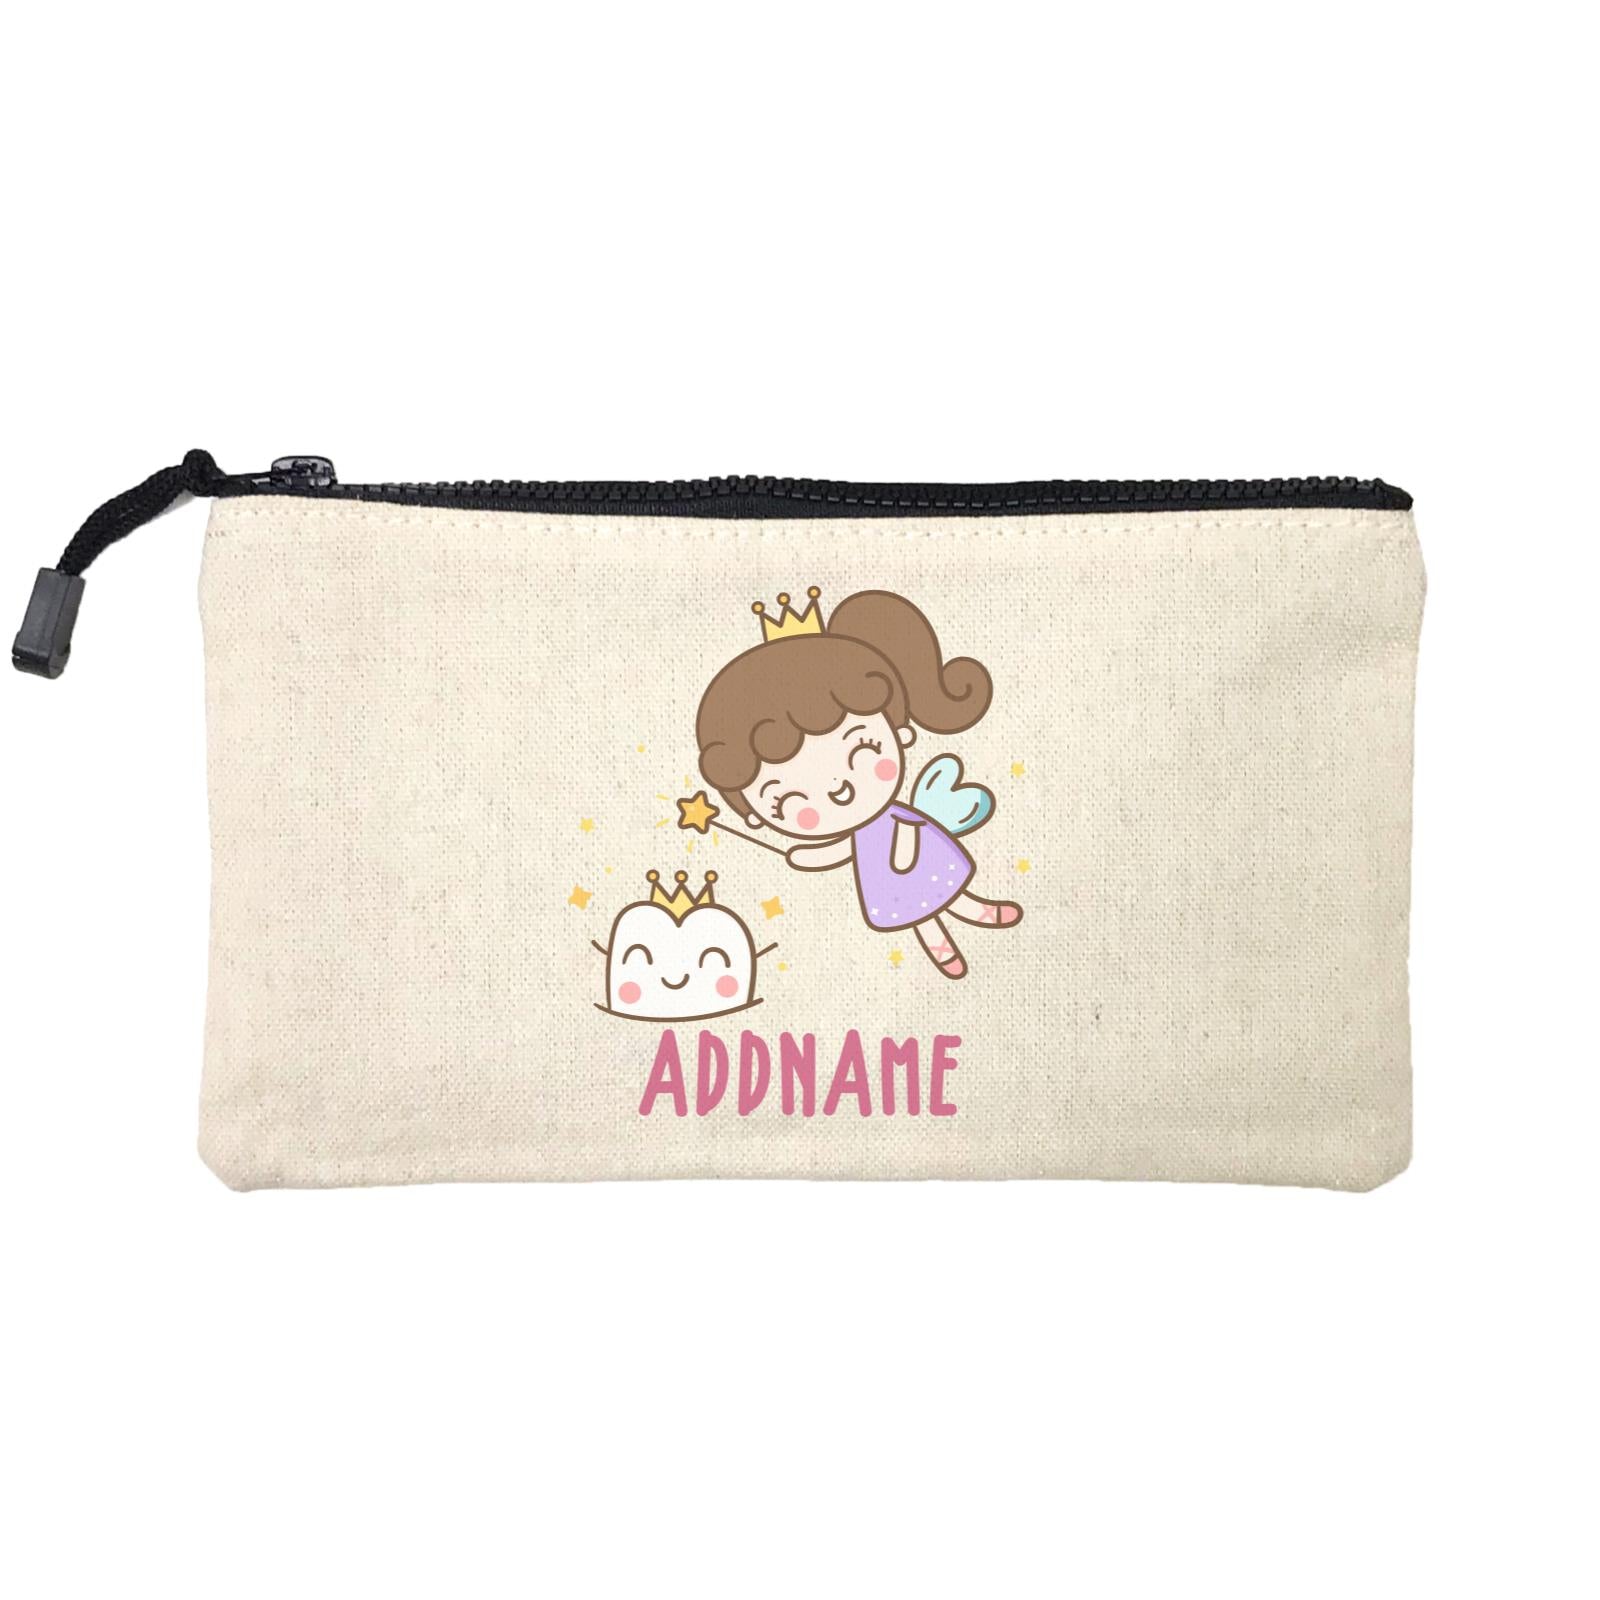 Unicorn And Princess Series Cute Tooth Fairy Addname Mini Accessories Stationery Pouch